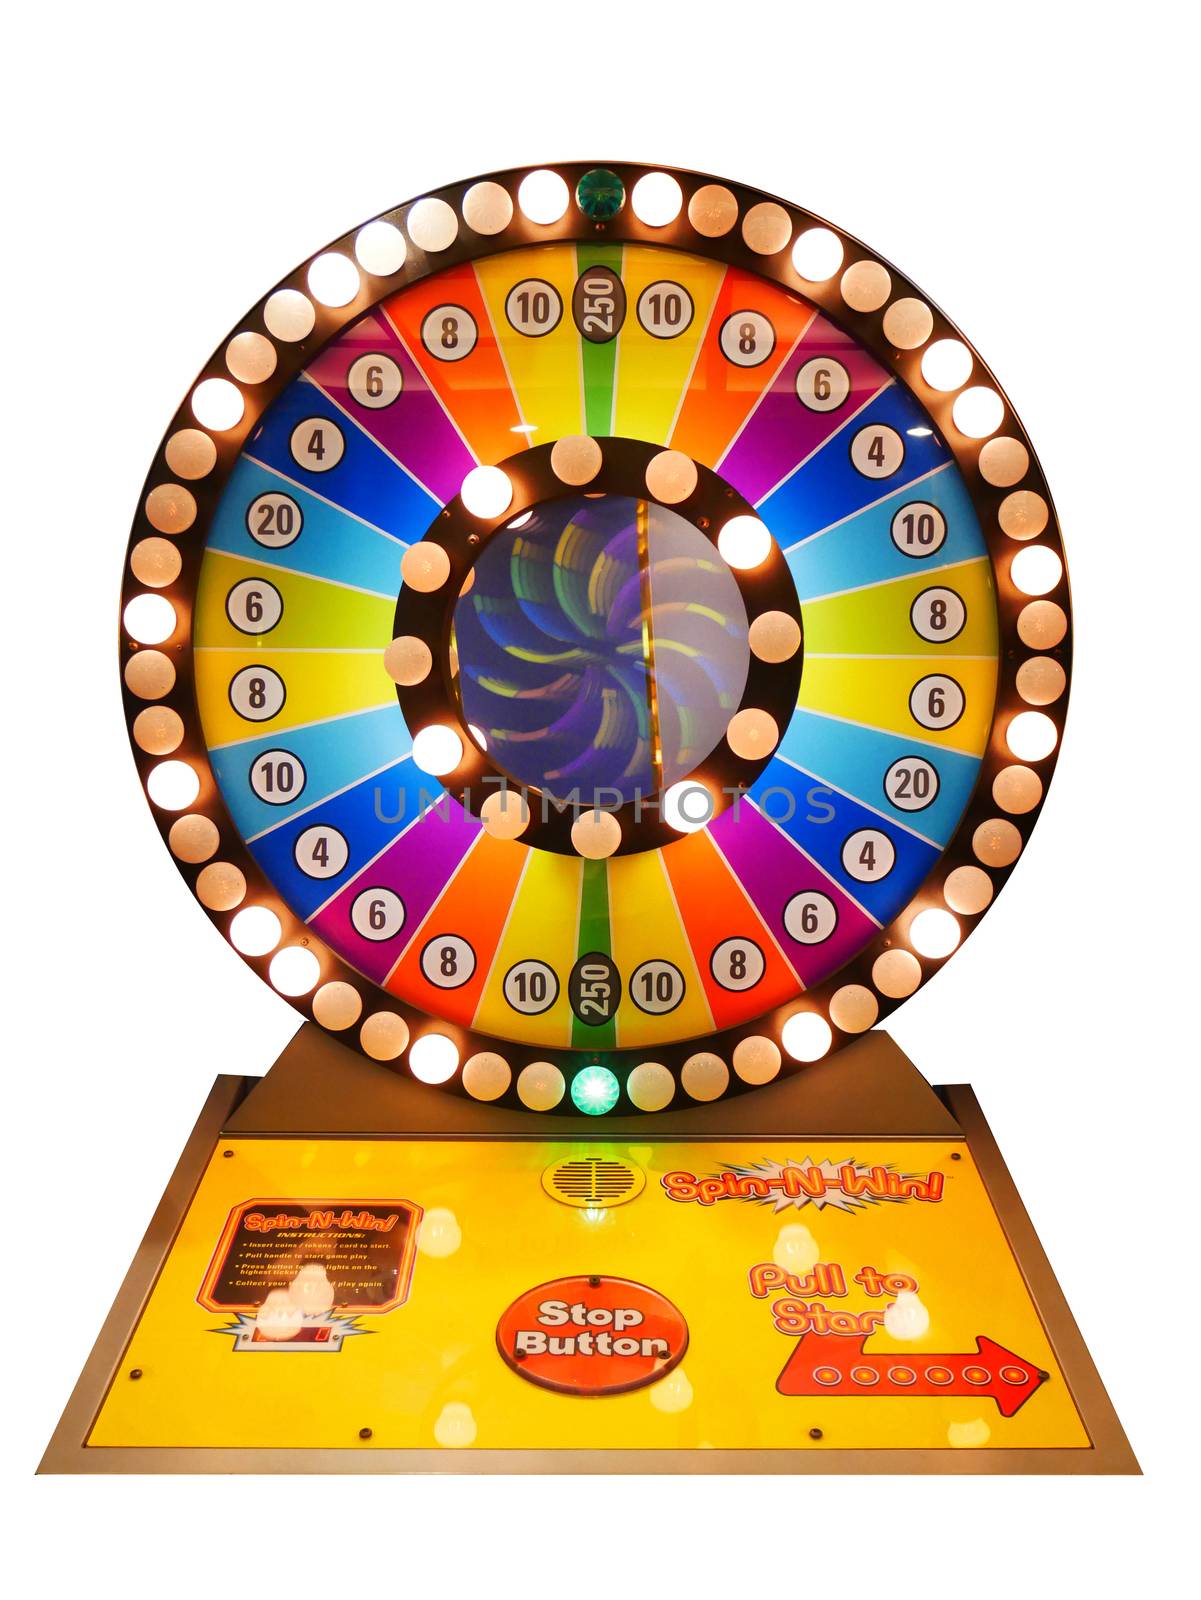 Casino gamble concept : colourful roulette game gamble wheel auto coin machine for modern casino isolate on white background by asiandelight